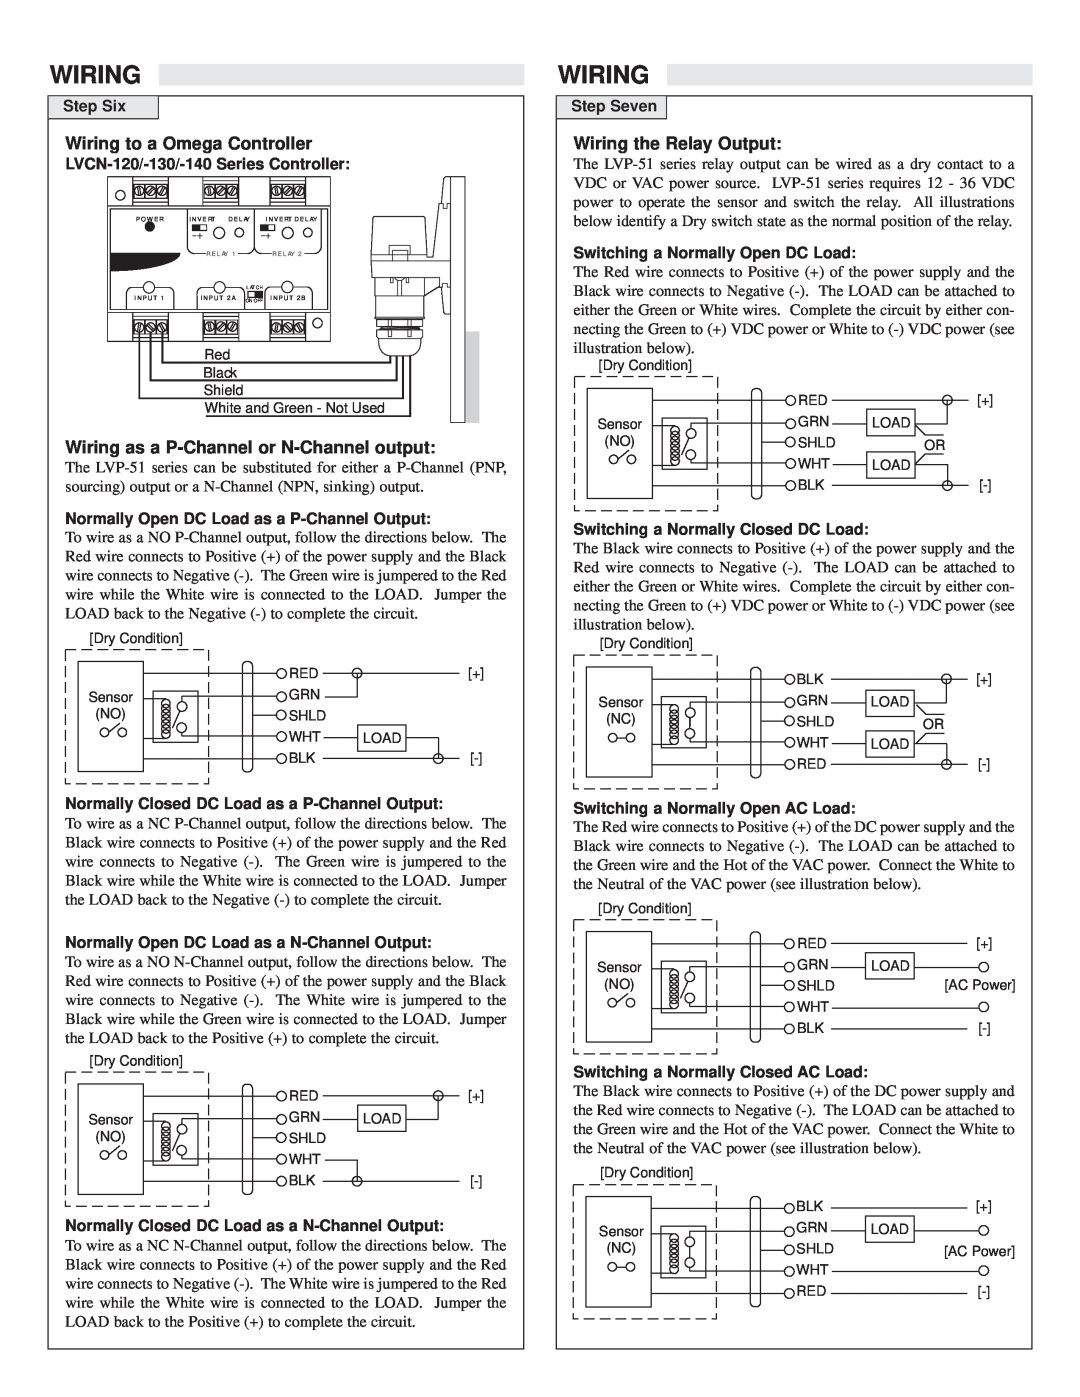 Omega Vehicle Security LVP-51 Series specifications Wiring to a Omega Controller, Wiring the Relay Output 